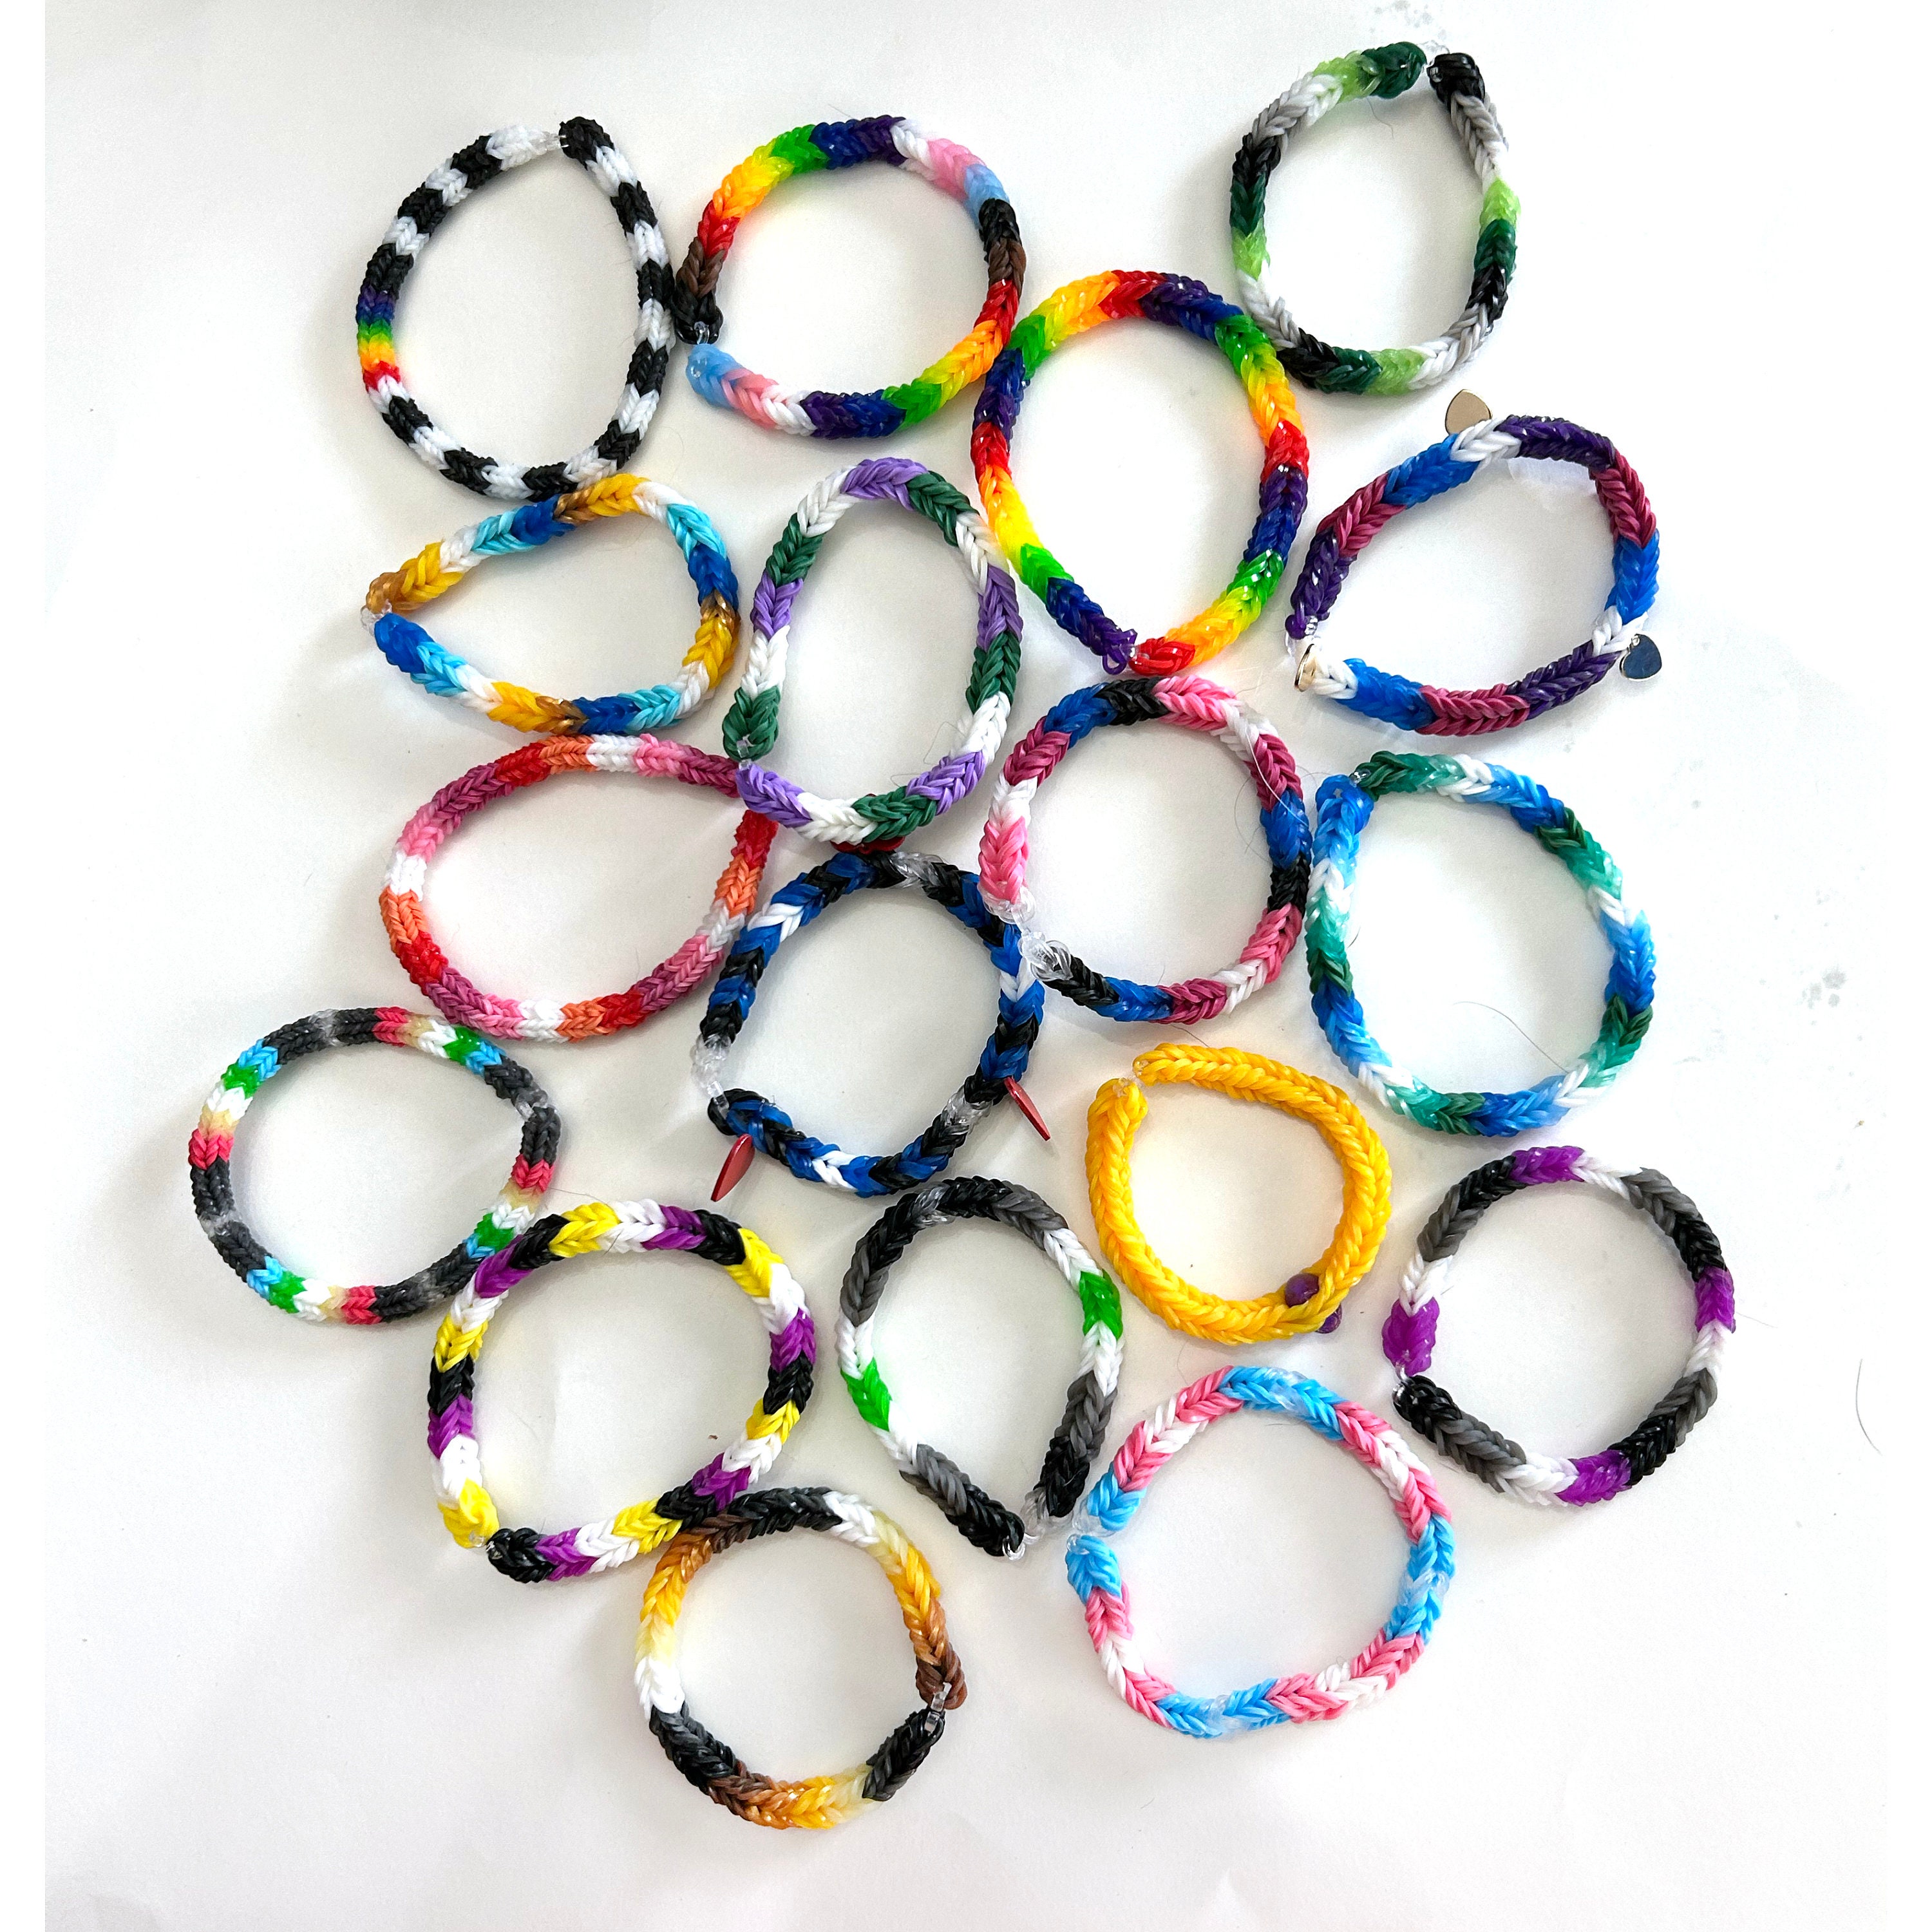 Krypton Color Ful Bracelet Maker Loom Bands - Color Ful Bracelet Maker Loom  Bands . Buy Loom bands toys in India. shop for Krypton products in India.